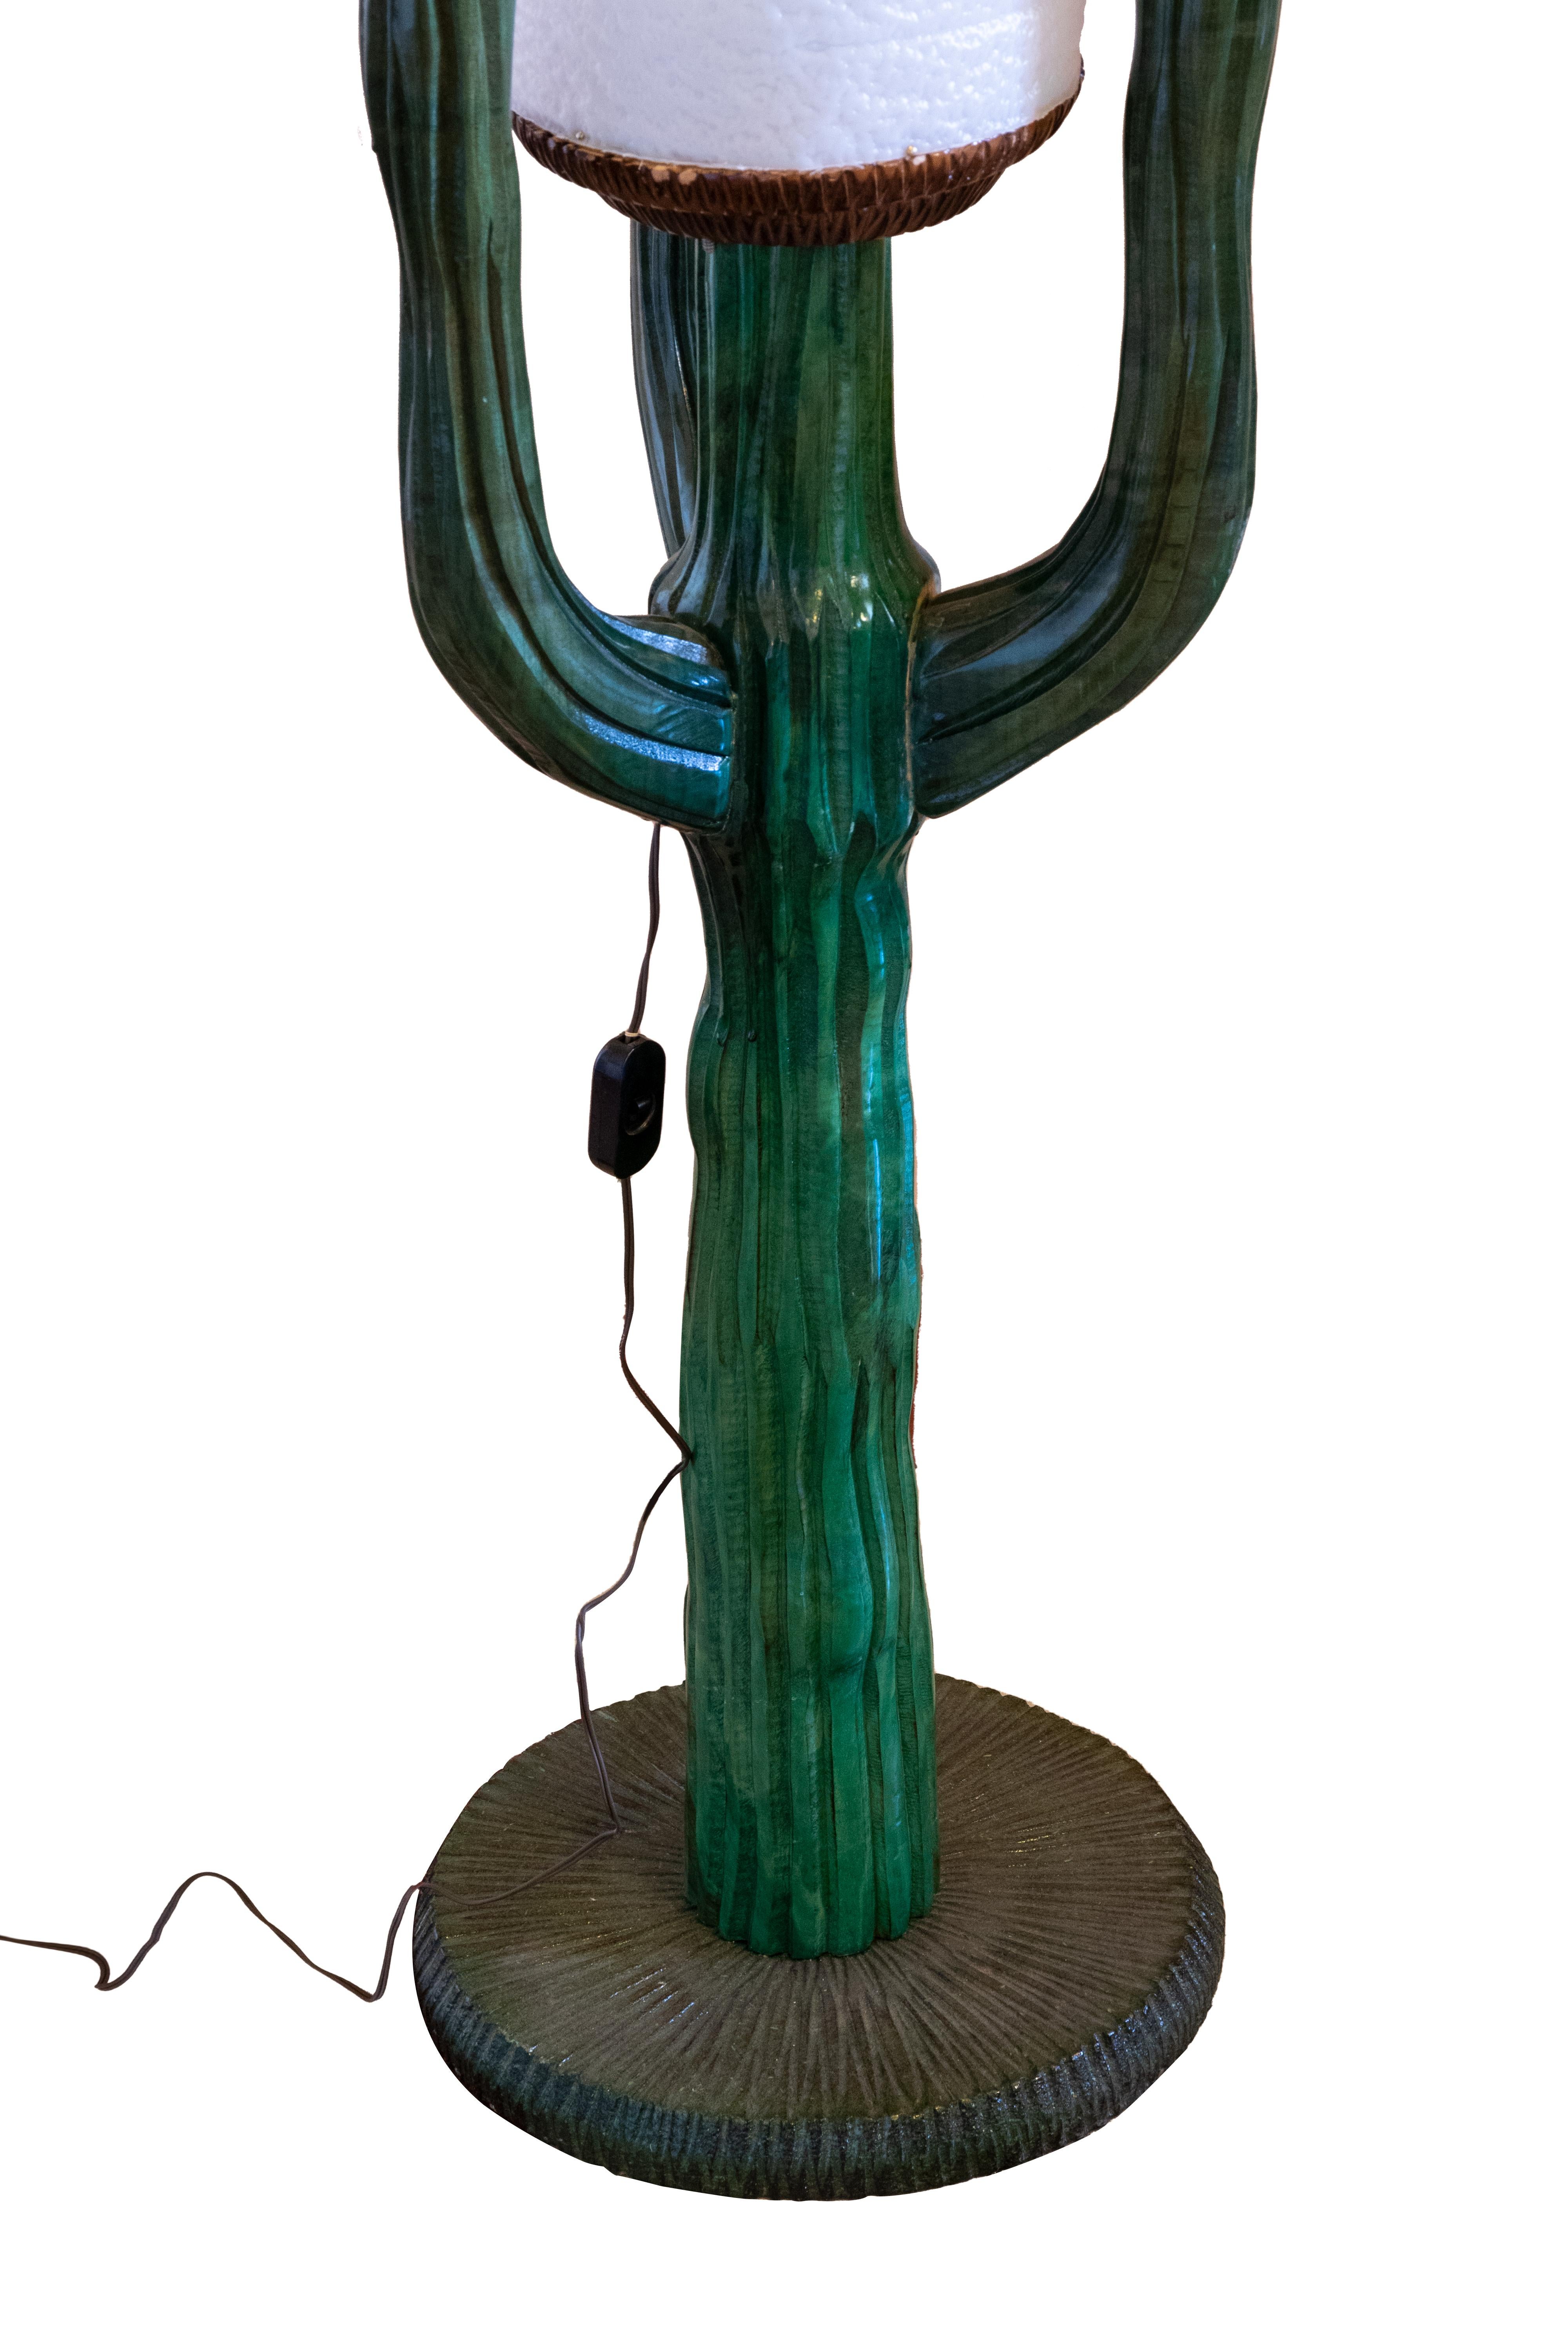 Cactus Floor Lamp in wood and plastic by P.S. Creazioni, Italy 1970s.

130 x 31 x 31 cm. 

Adjustable arms.

Very good condition.